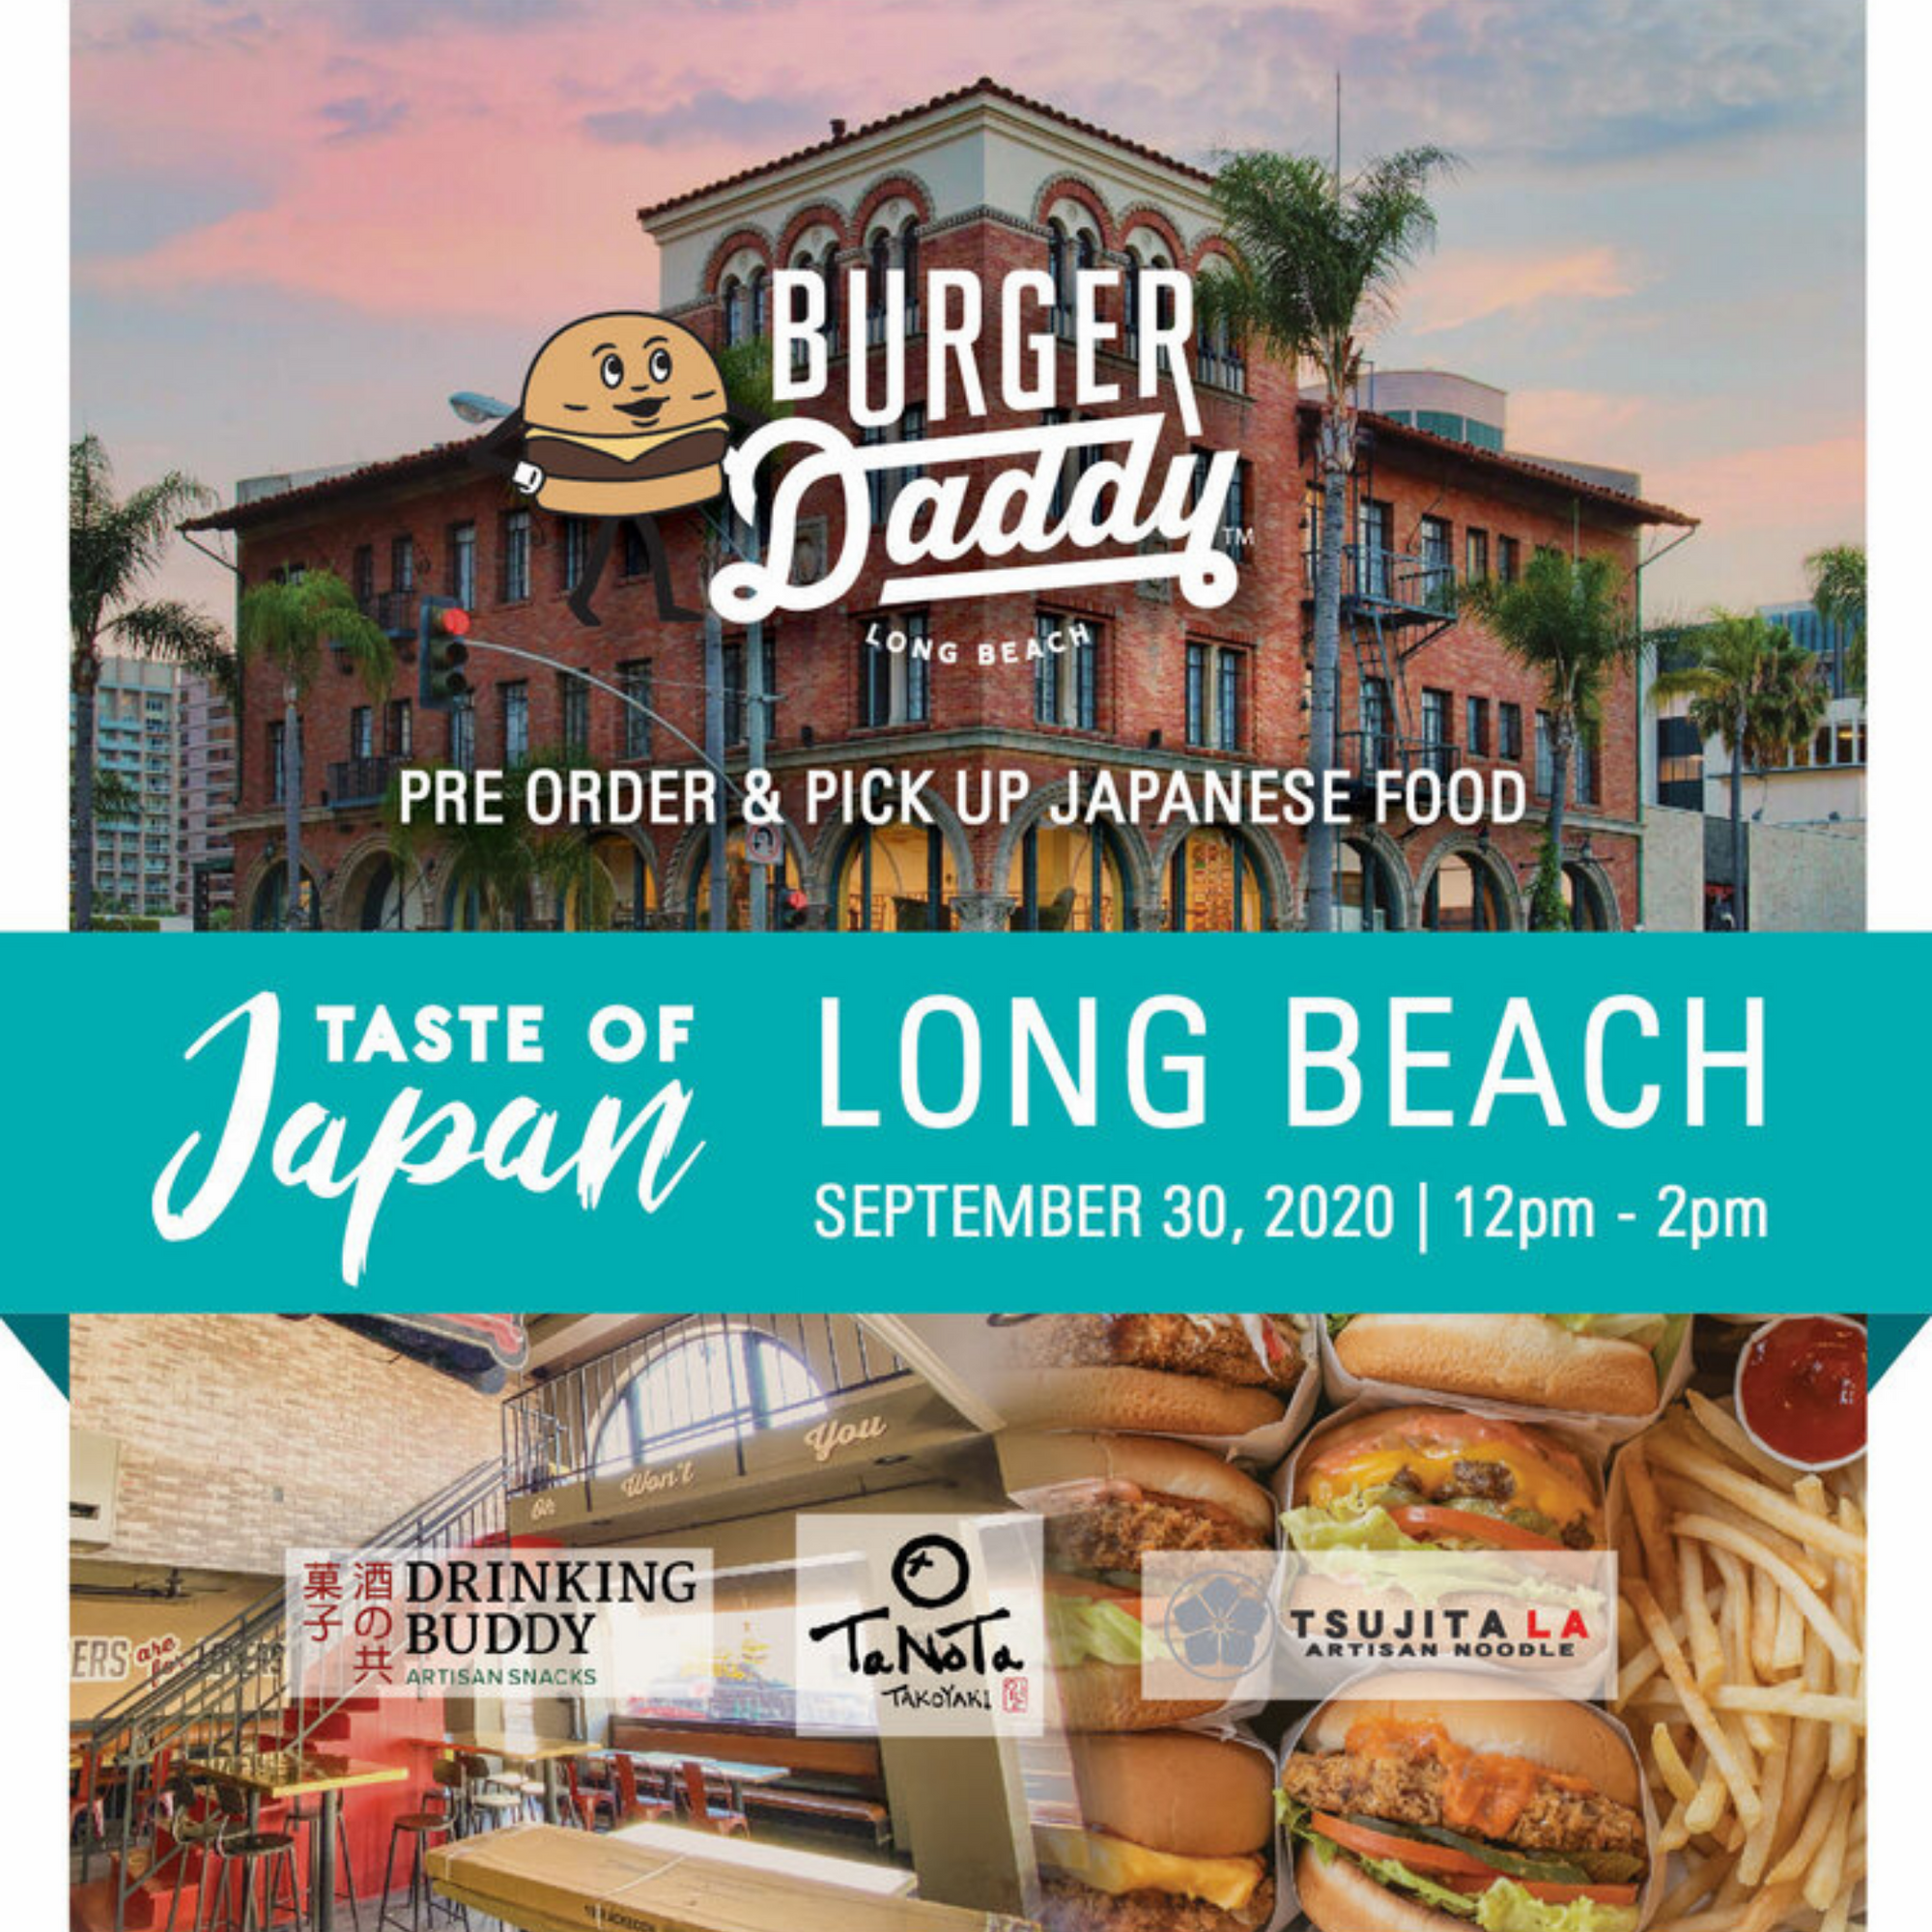 Pop-Up Event: Burger Daddy | Wednesday, September 30, 2020 | 12:00pm - 2:00pm